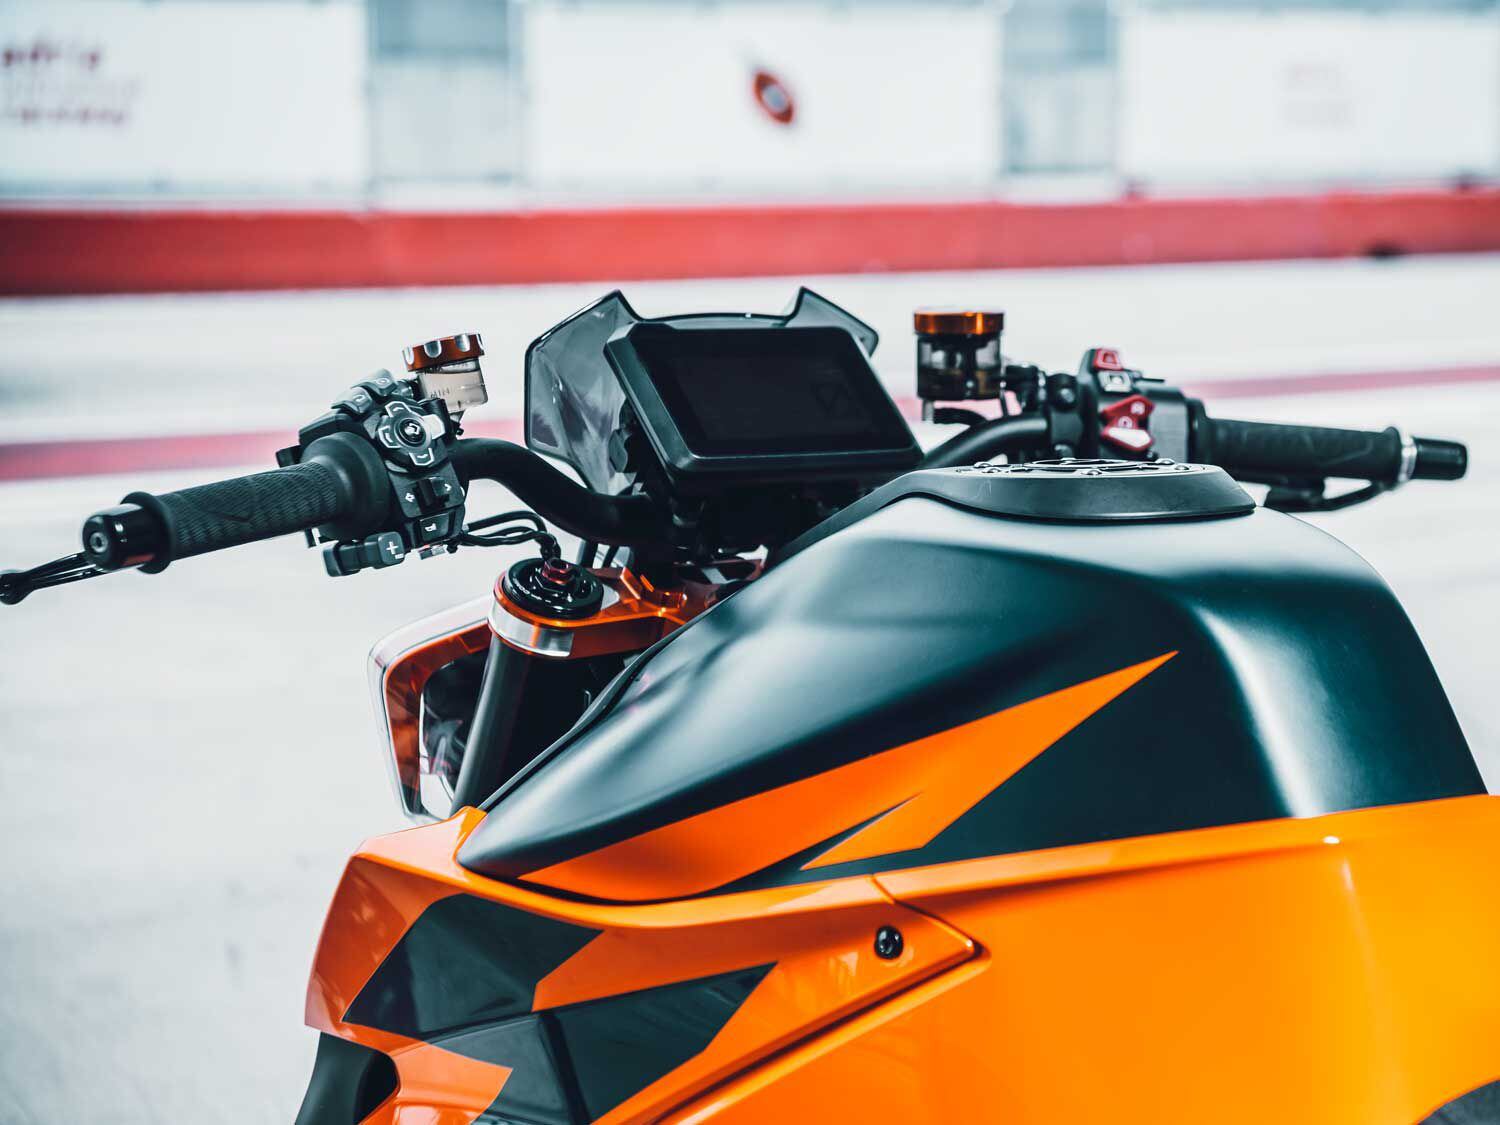 The 2020 1290 Super Duke R wears a bolder and brighter color TFT display that’s easier to read than before. The switch gear has been improved with greater tactile function, and the menu navigation is easy to understand.